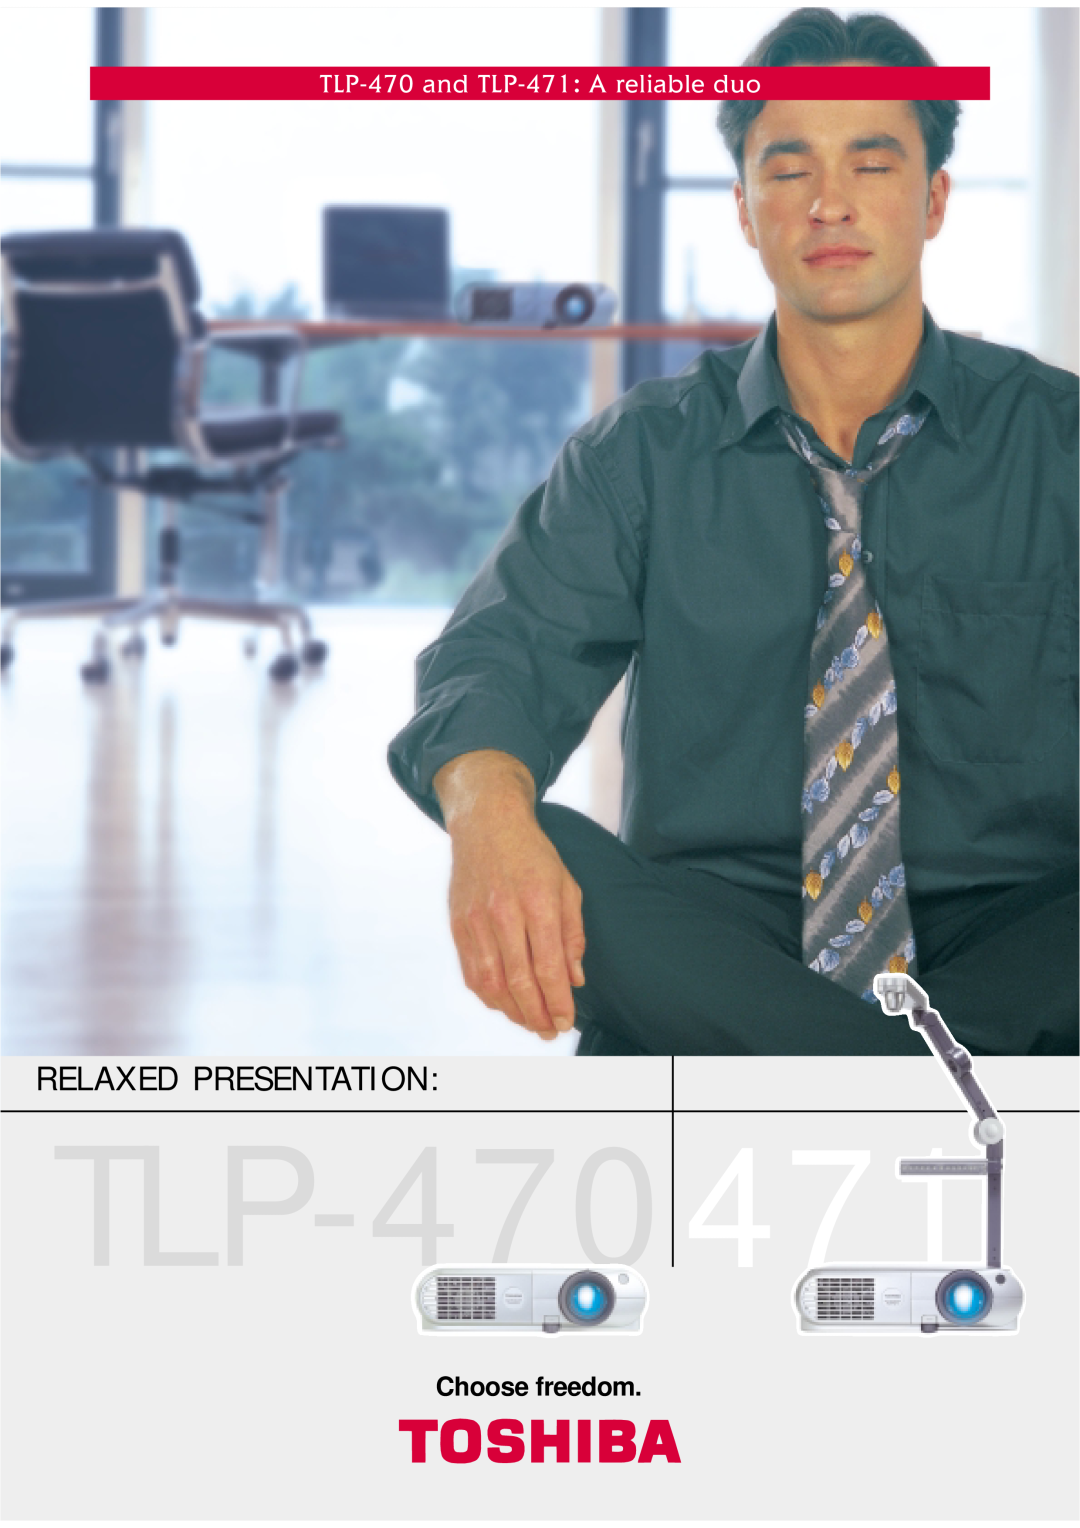 Toshiba TLP471 manual Relaxed Presentation, Choose freedom, TLP-470 and TLP-471 A reliable duo 